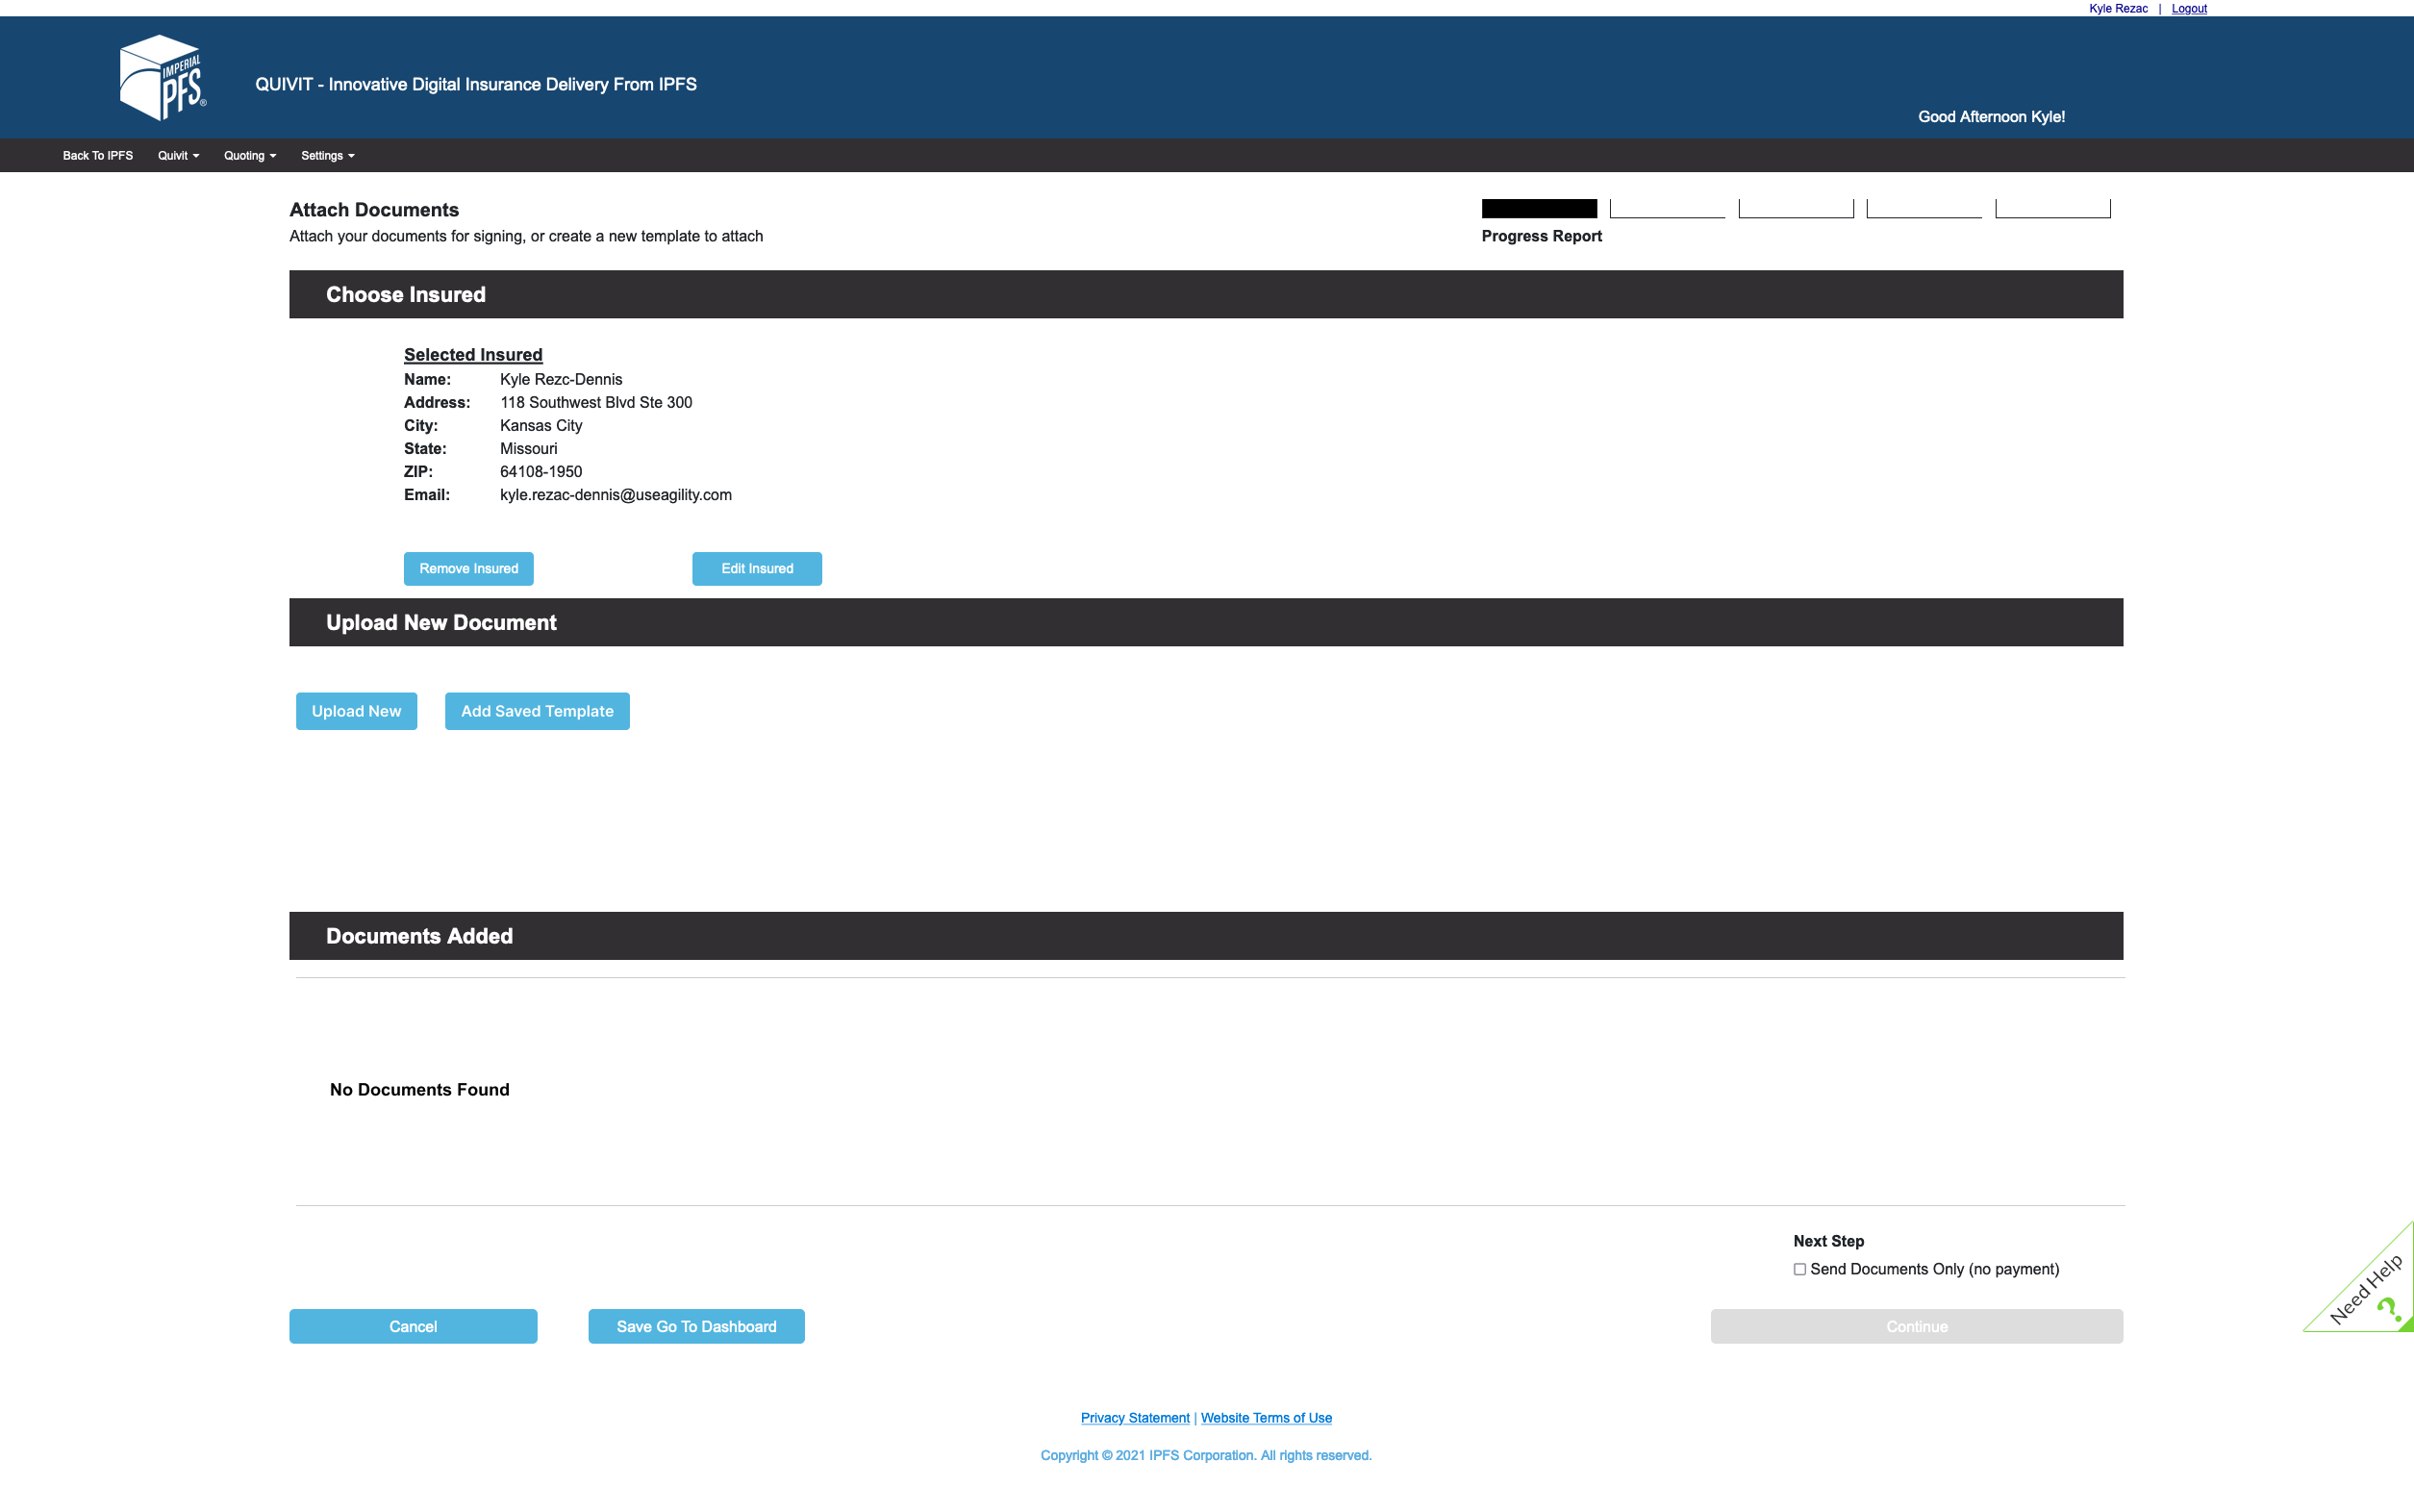 Process Screen that allows user to choose insured, upload docs, and that shows documents added to package. 